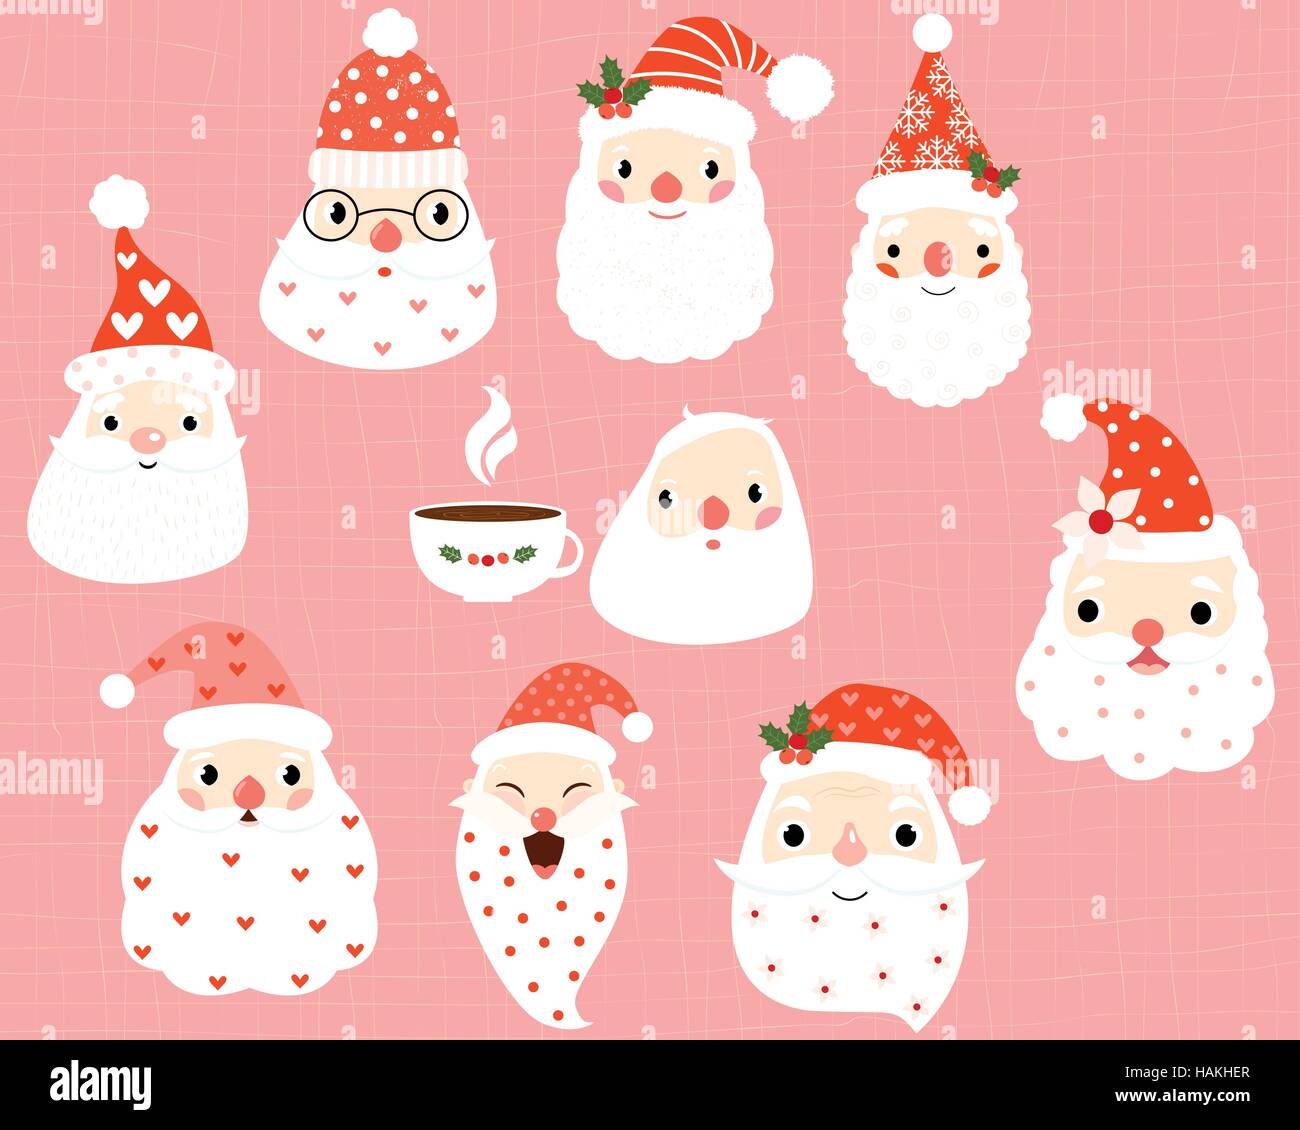 Cute hipster and funny Santa Claus heads and faces with hats and white beard with hearts and dots Stock Vector